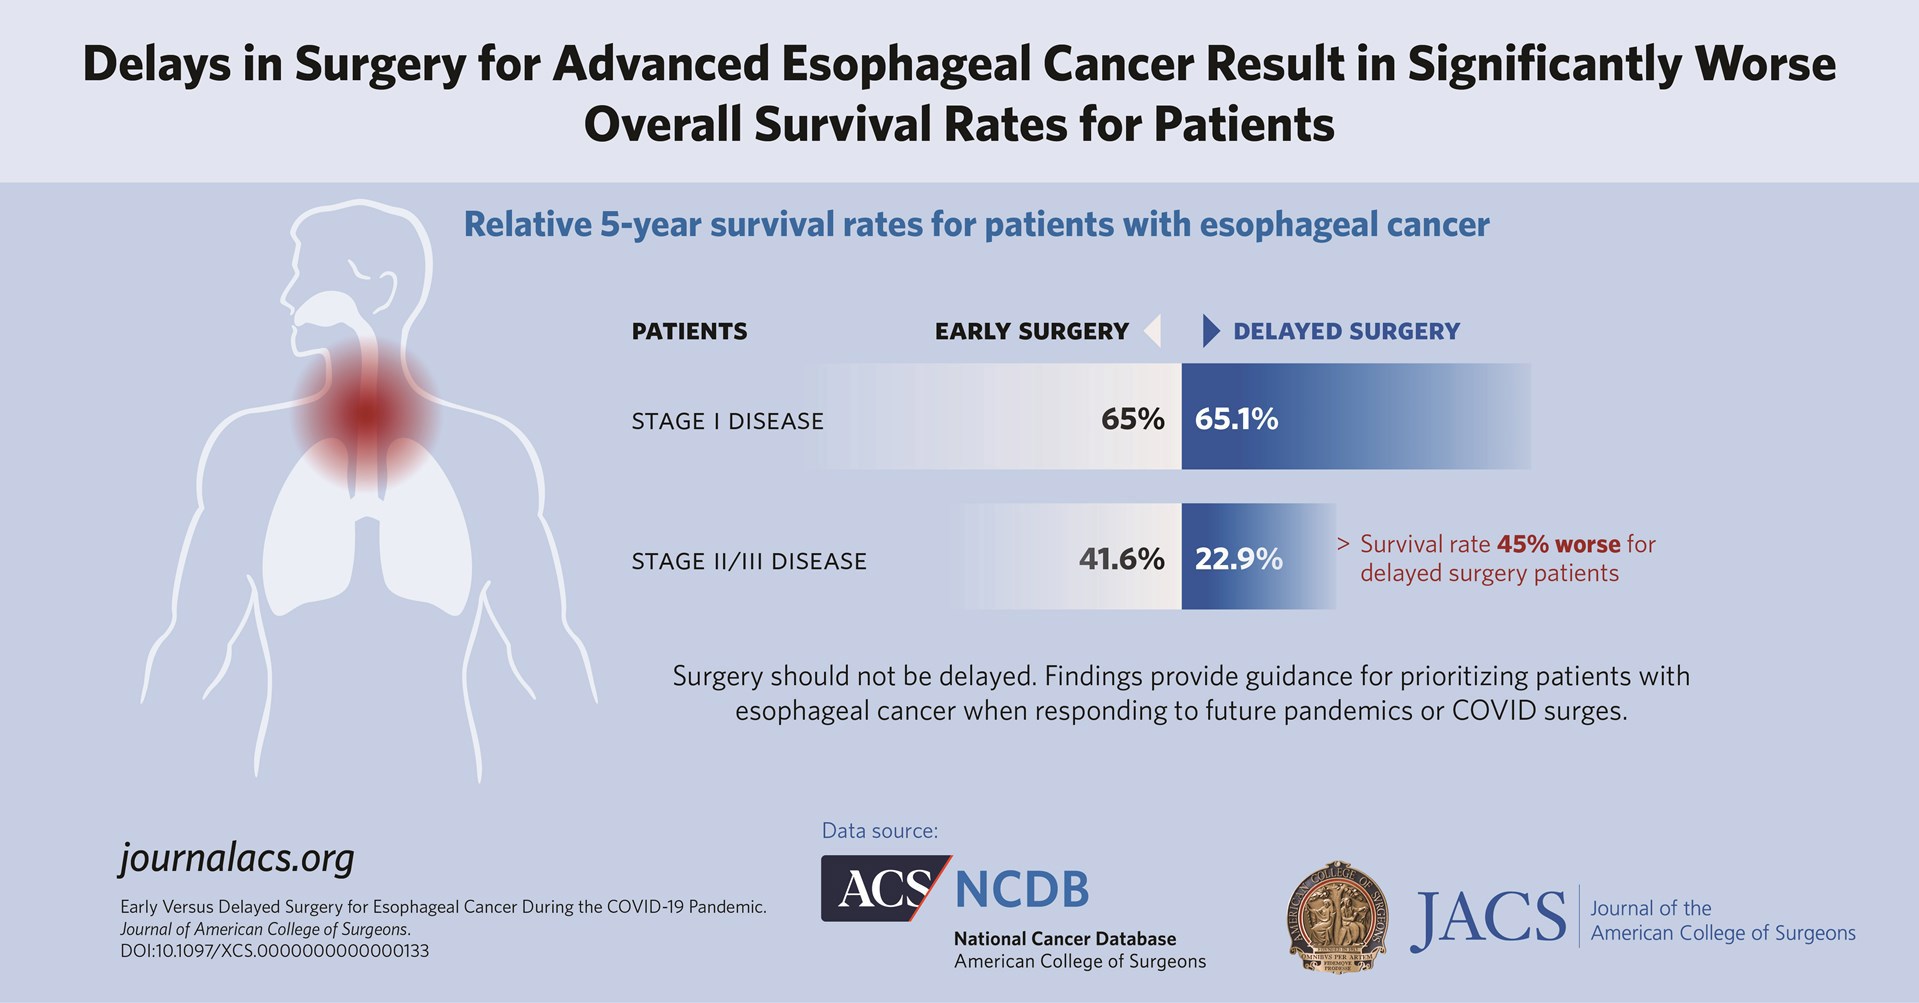 Delays in surgery for advanced esophageal cancer result in